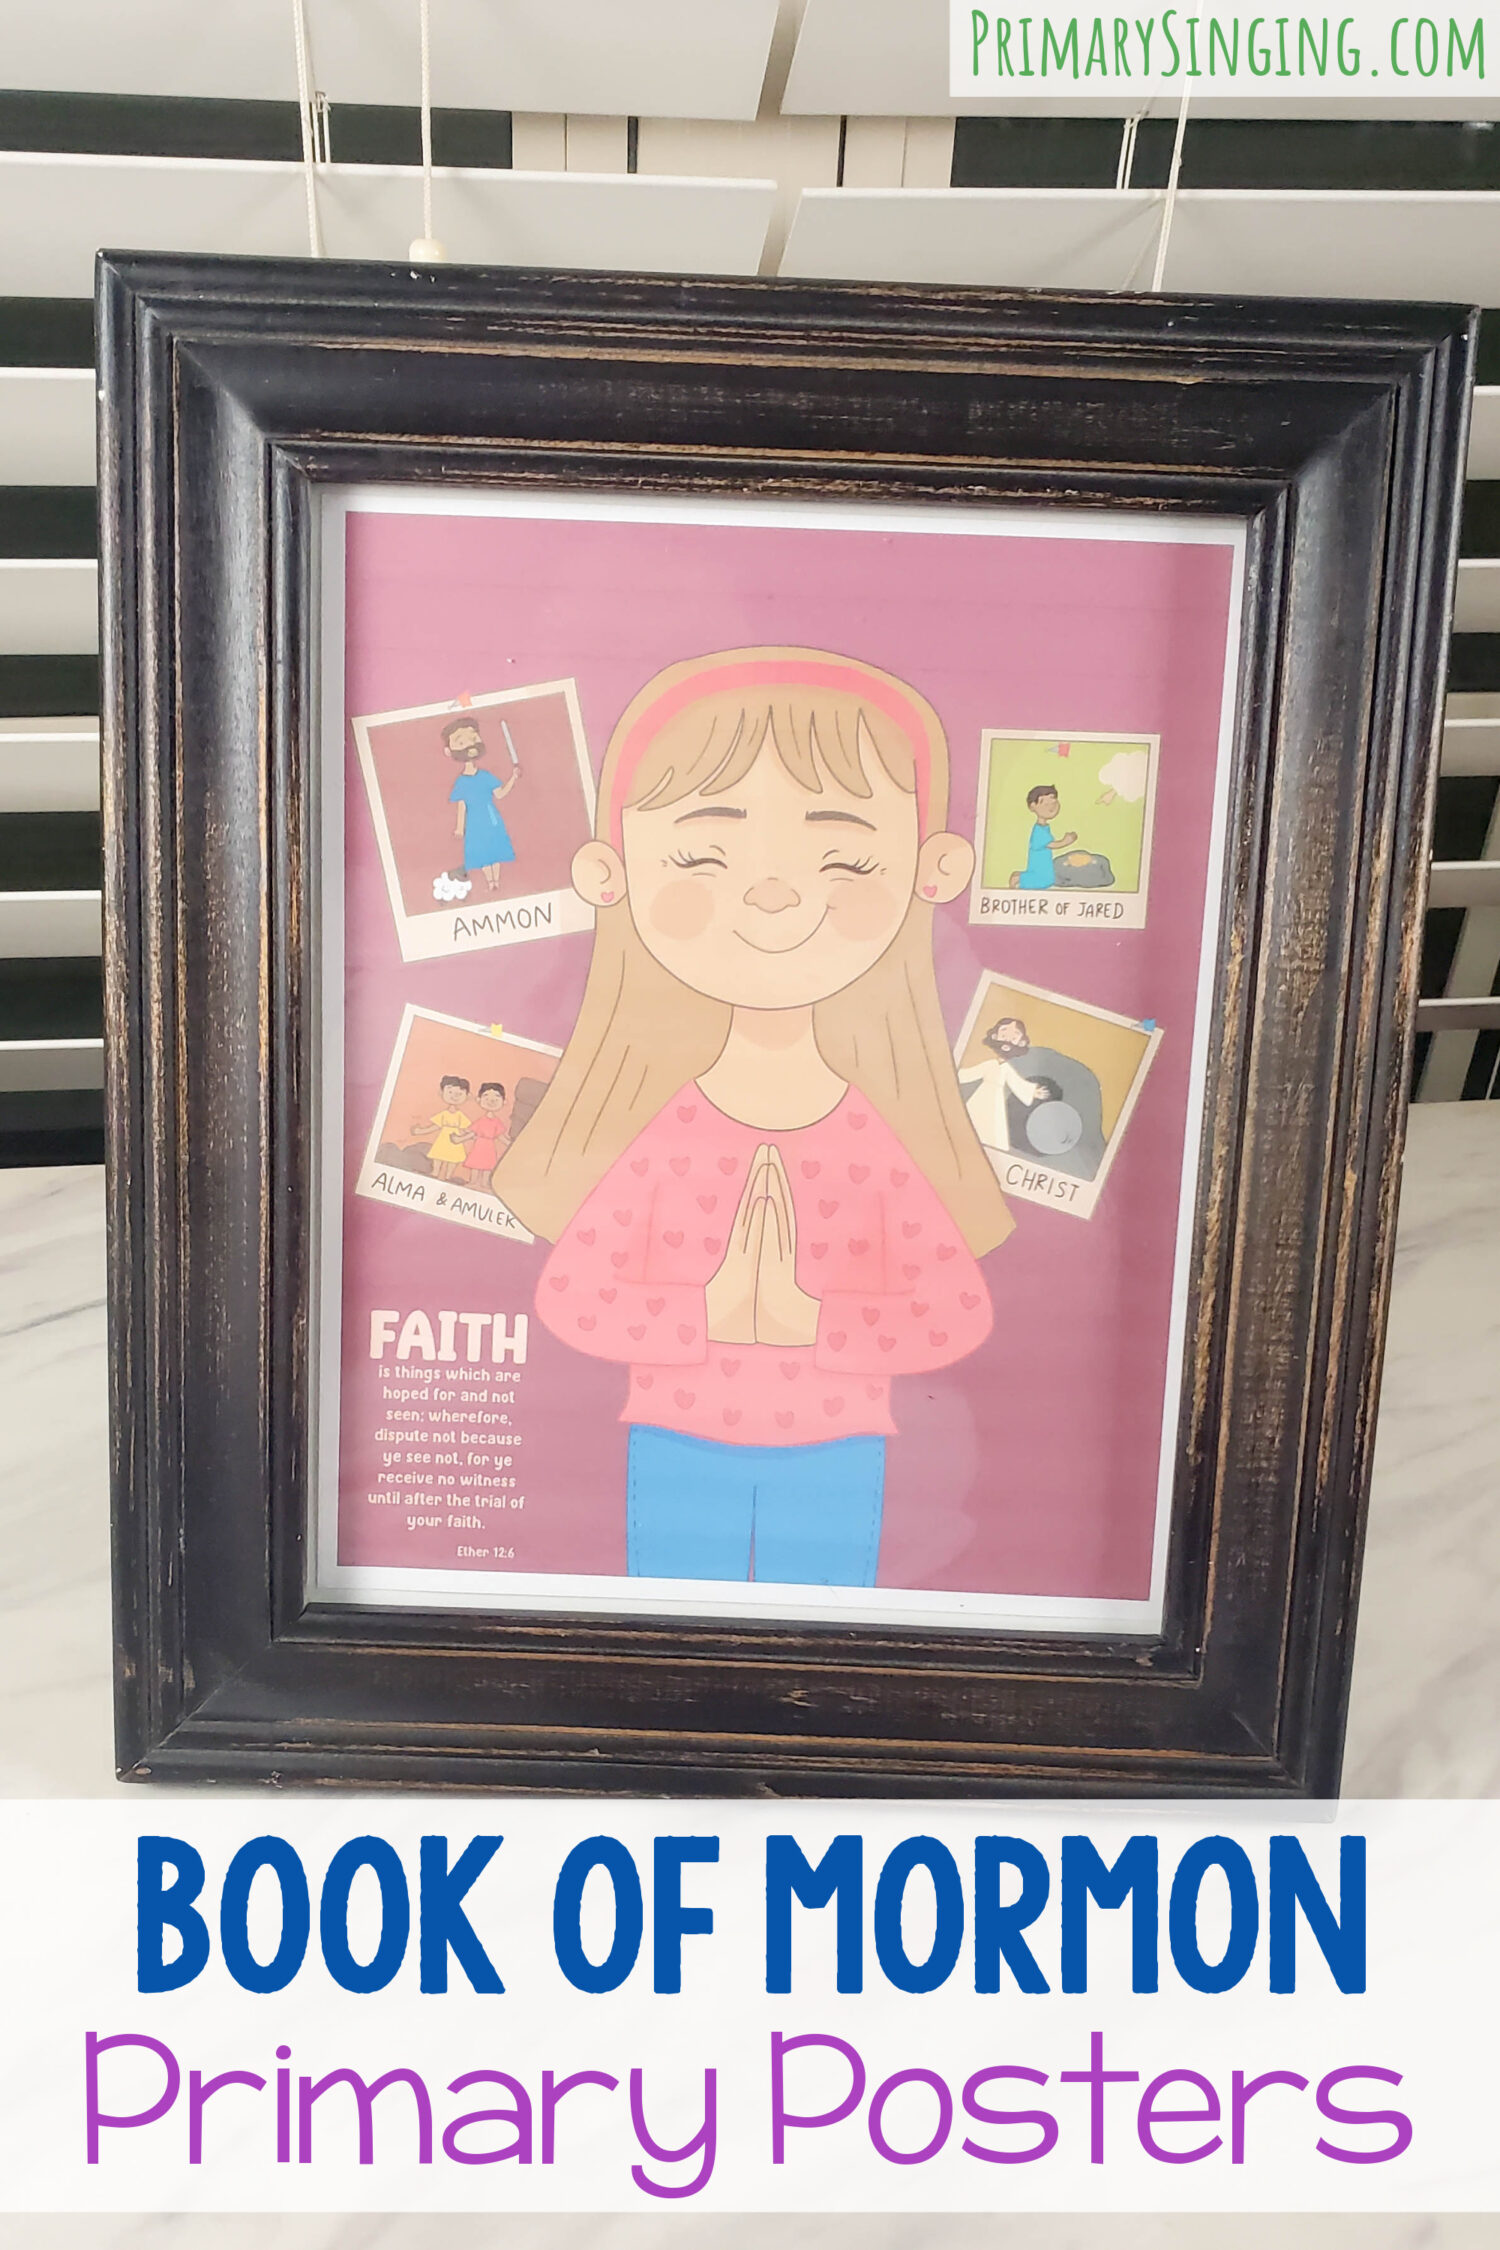 Book of Mormon Primary Posters - Print out this set of 24 different posters to get you through the year including two different themed posters for each month that follow along with Come Follow Me curriculum! Learn about your favorite scripture heroes and doctrinal topics throughout the year with these companion art prints!